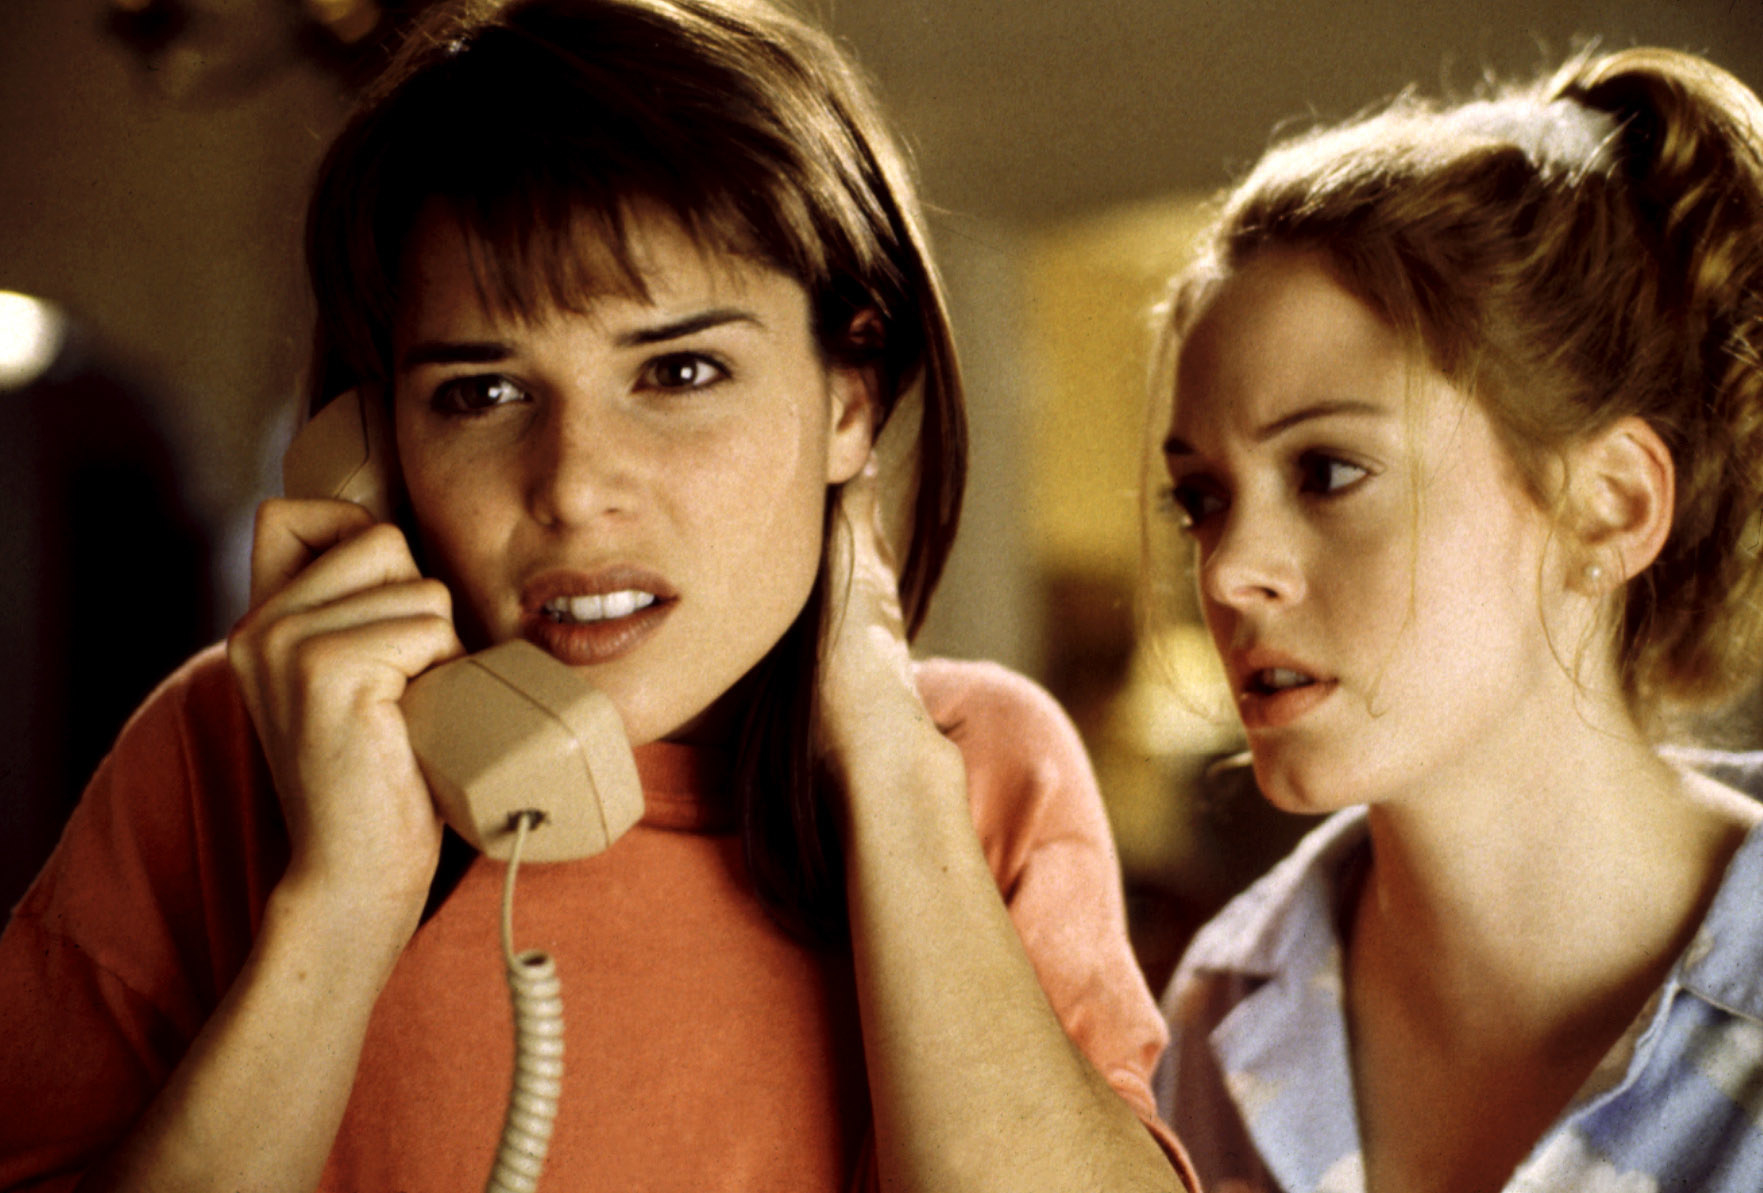 Neve Campbell and Rose McGowan talk on the phone